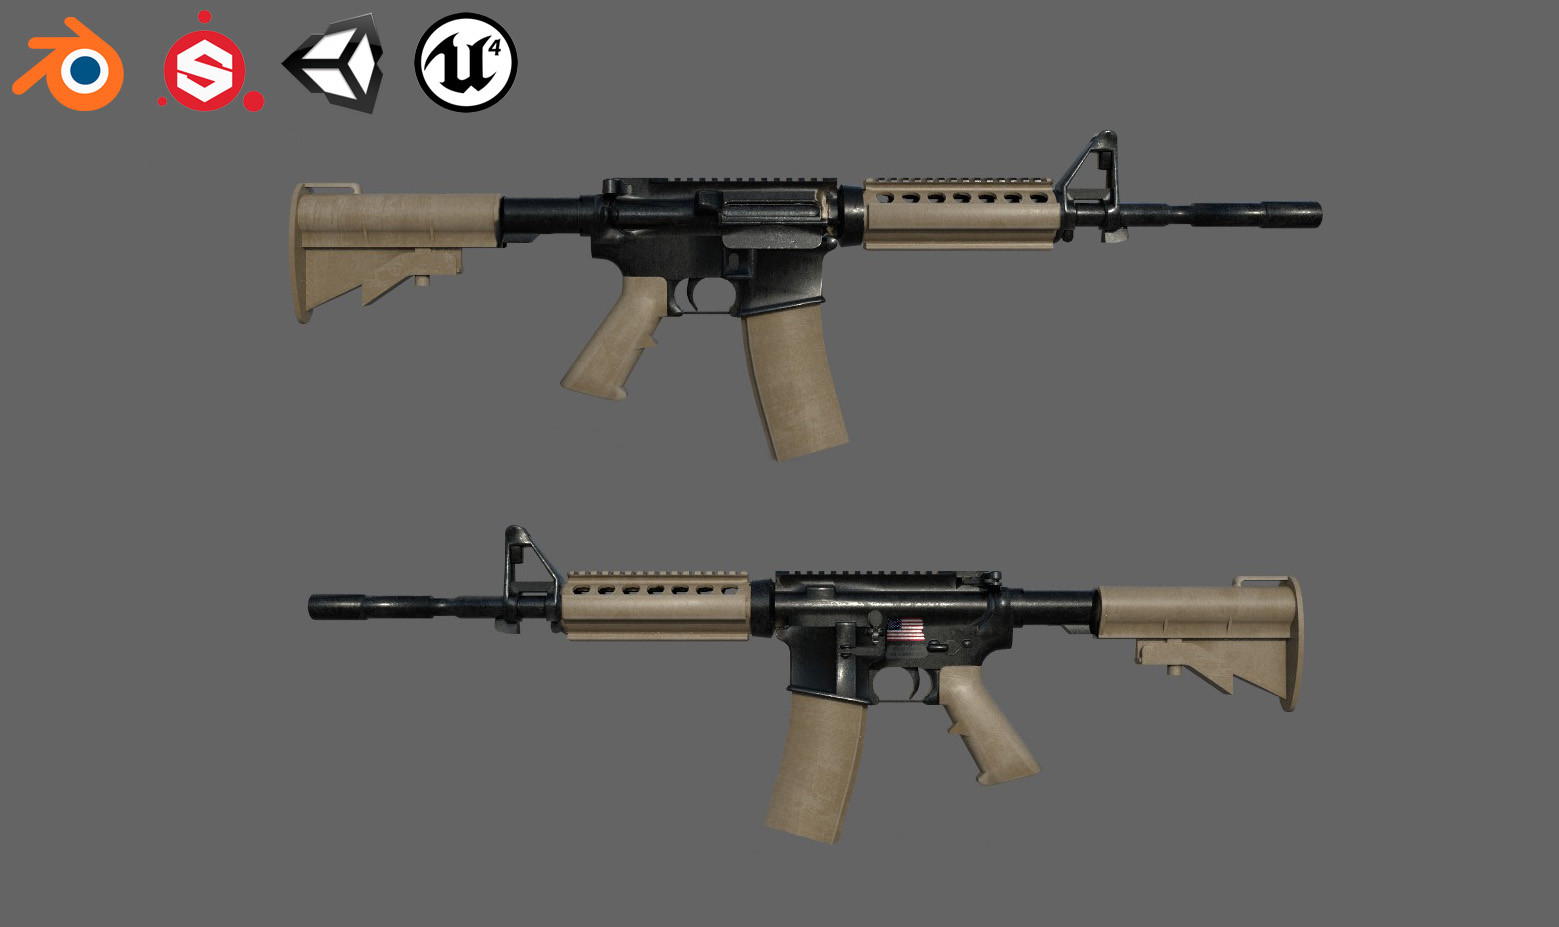 Hi everyone, I present to you my new model of the famous weapon M4A1. 